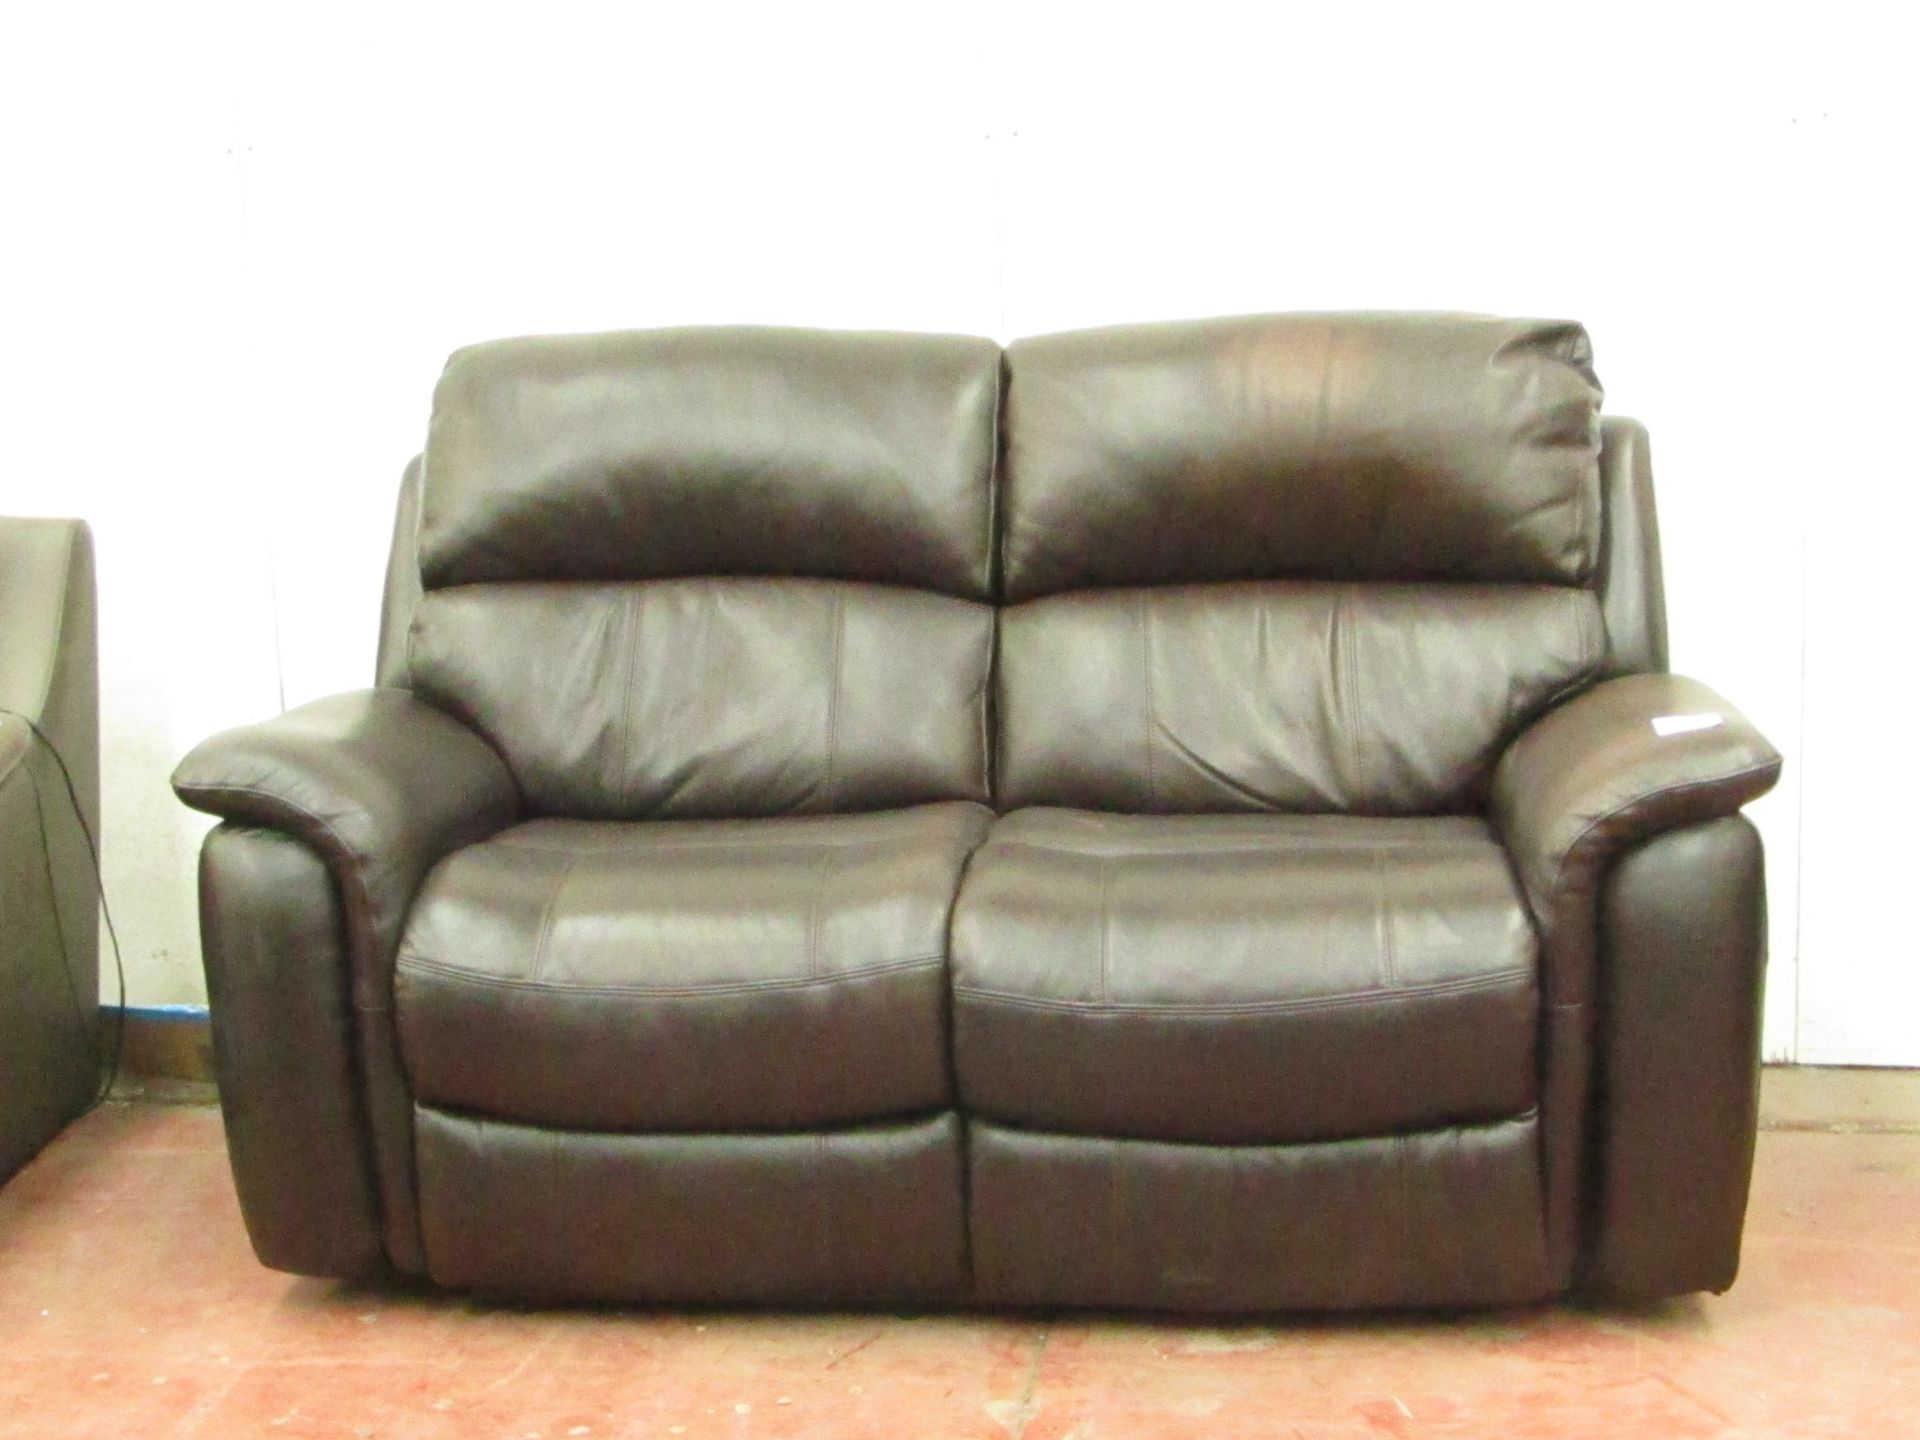 Polaski 2 seater Manual reclining sofa, the mechanism is tested working